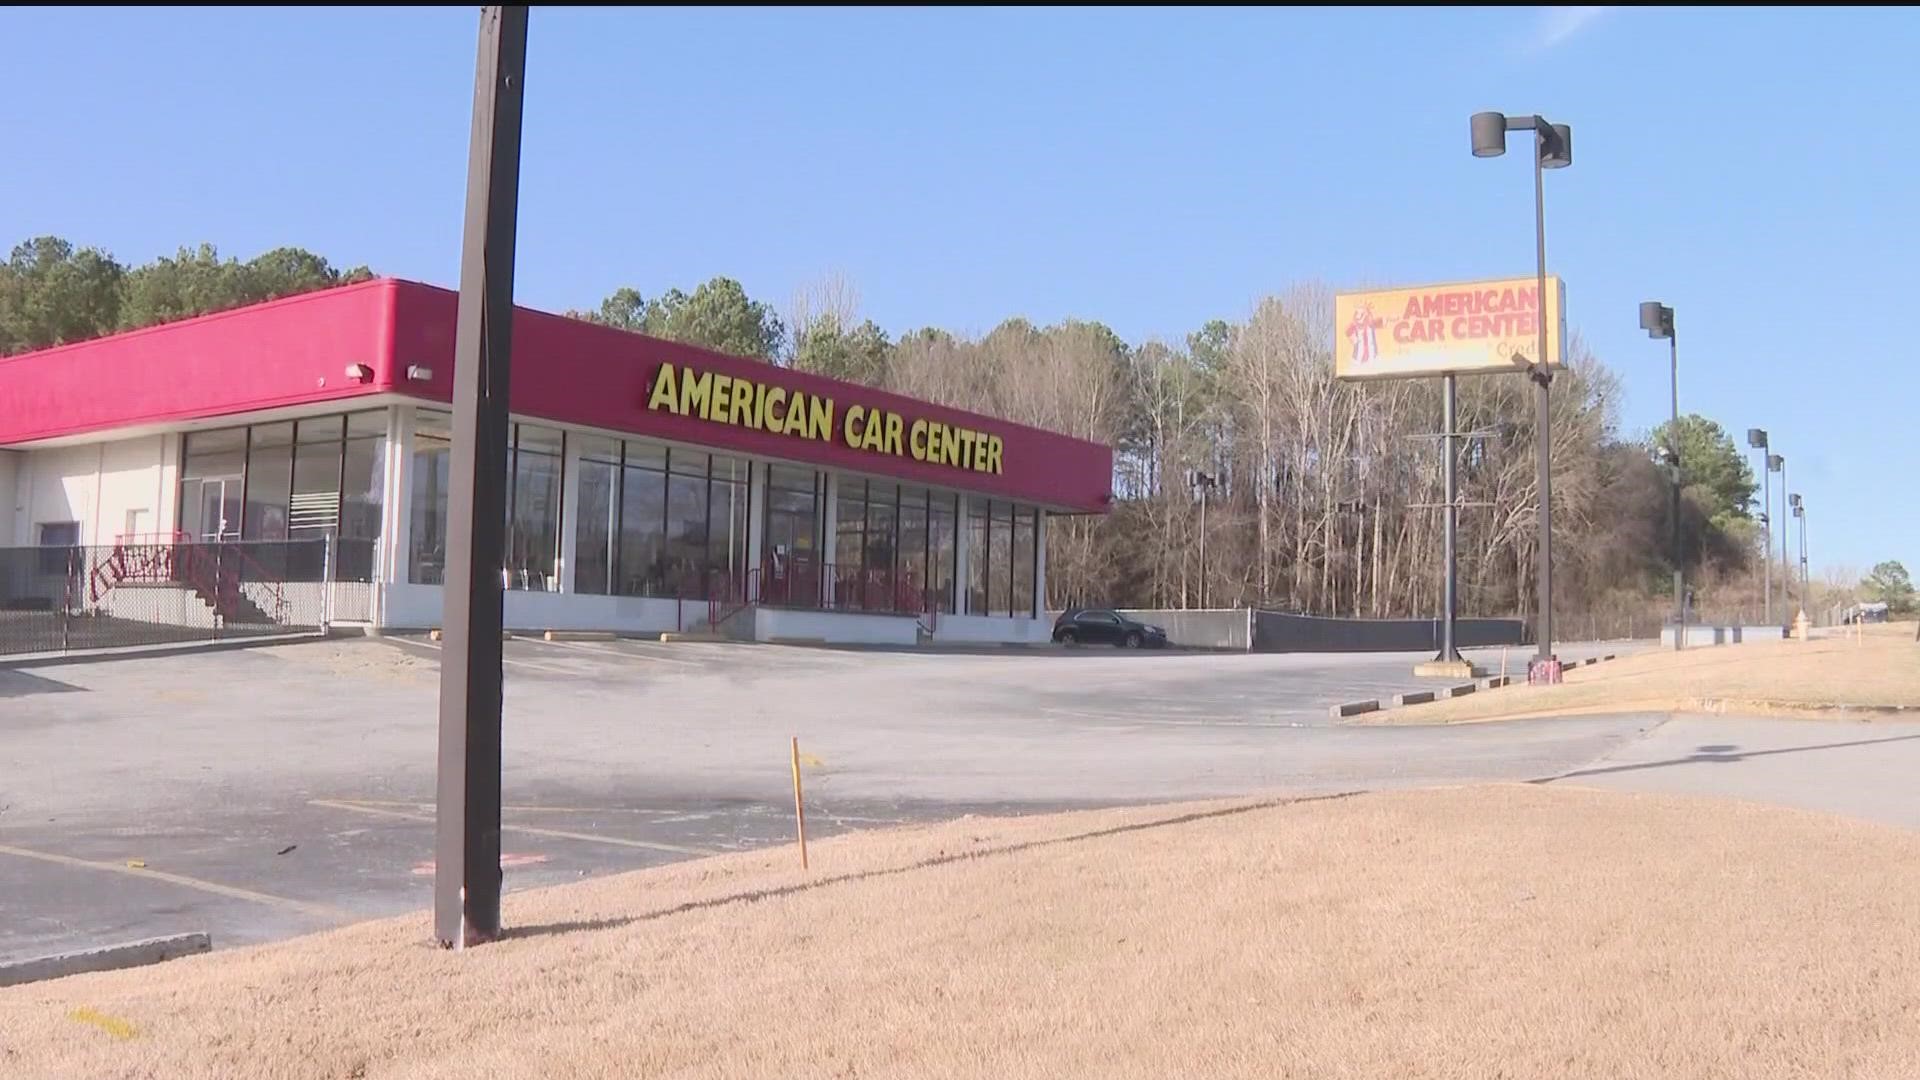 11Alive visited the Chamblee location Tuesday and spotted cars being hauled off the lot.